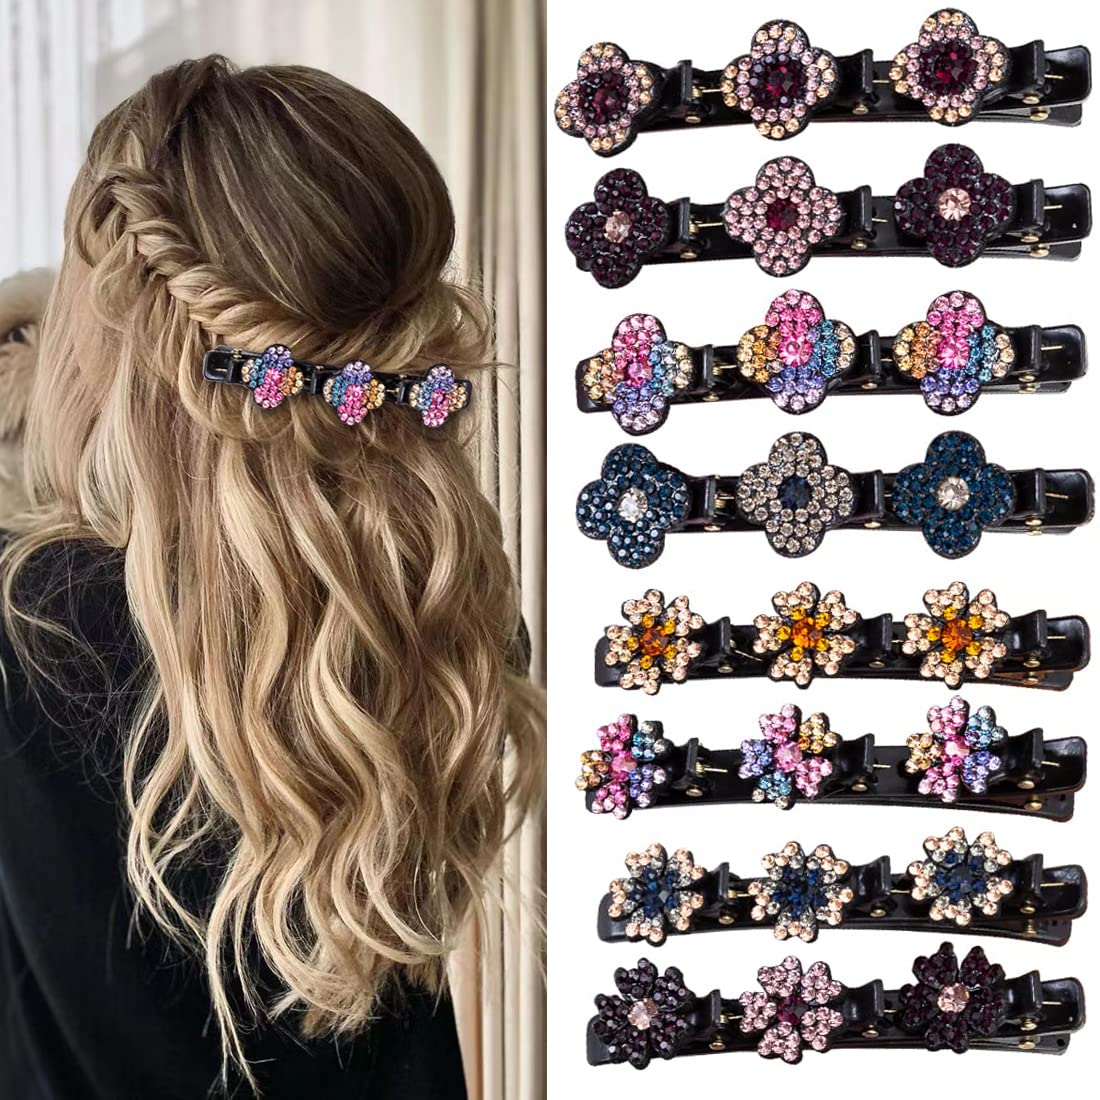 8 Pcs Hair clips Sparkling Crystal Stone Braided Hair Clips for